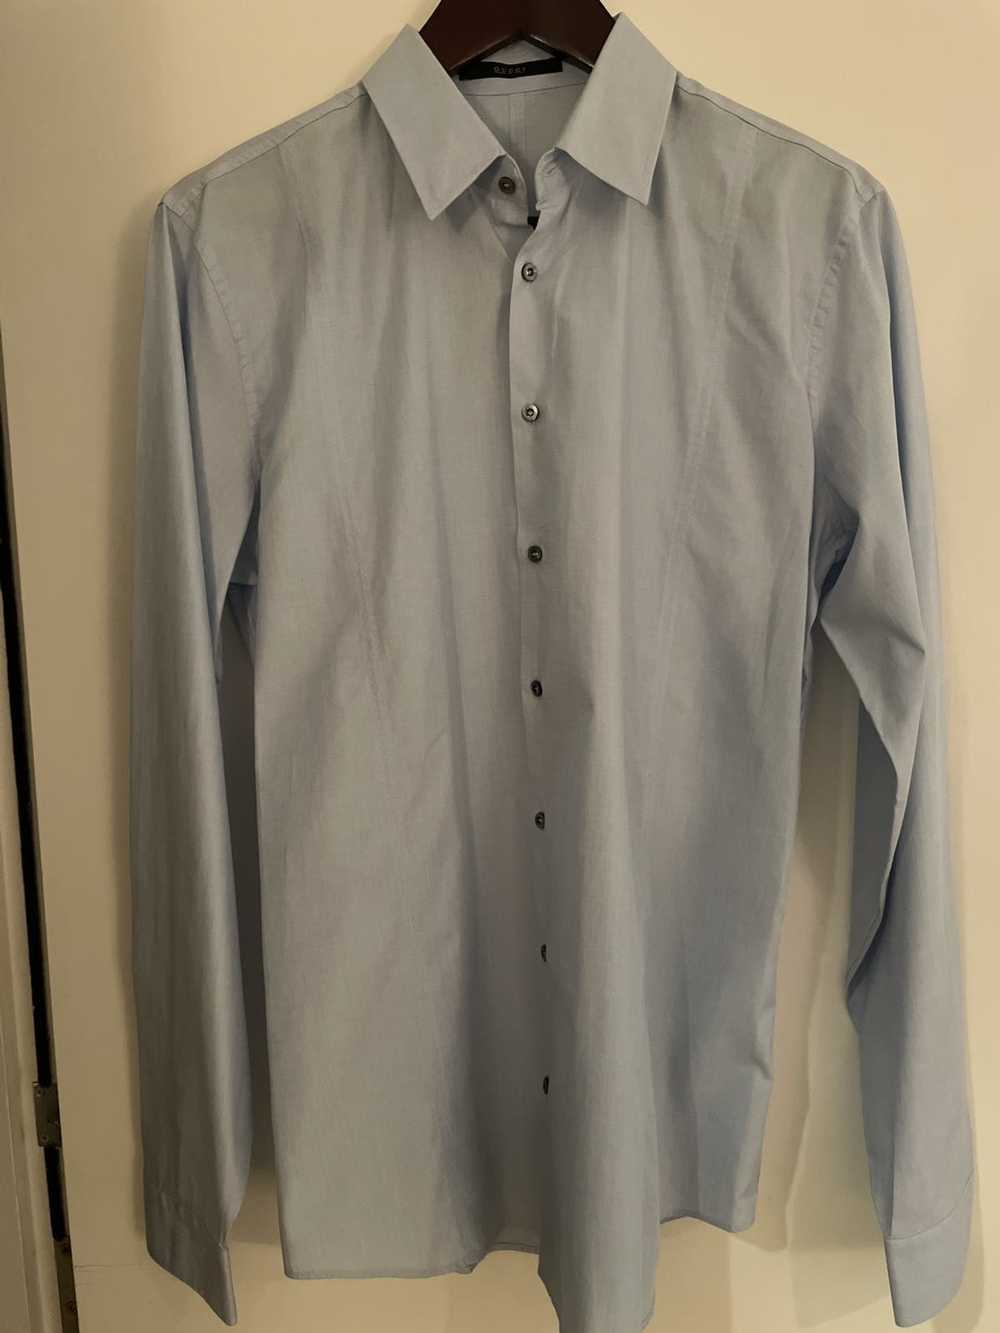 Gucci Gucci Shirt in Light Blue - image 1